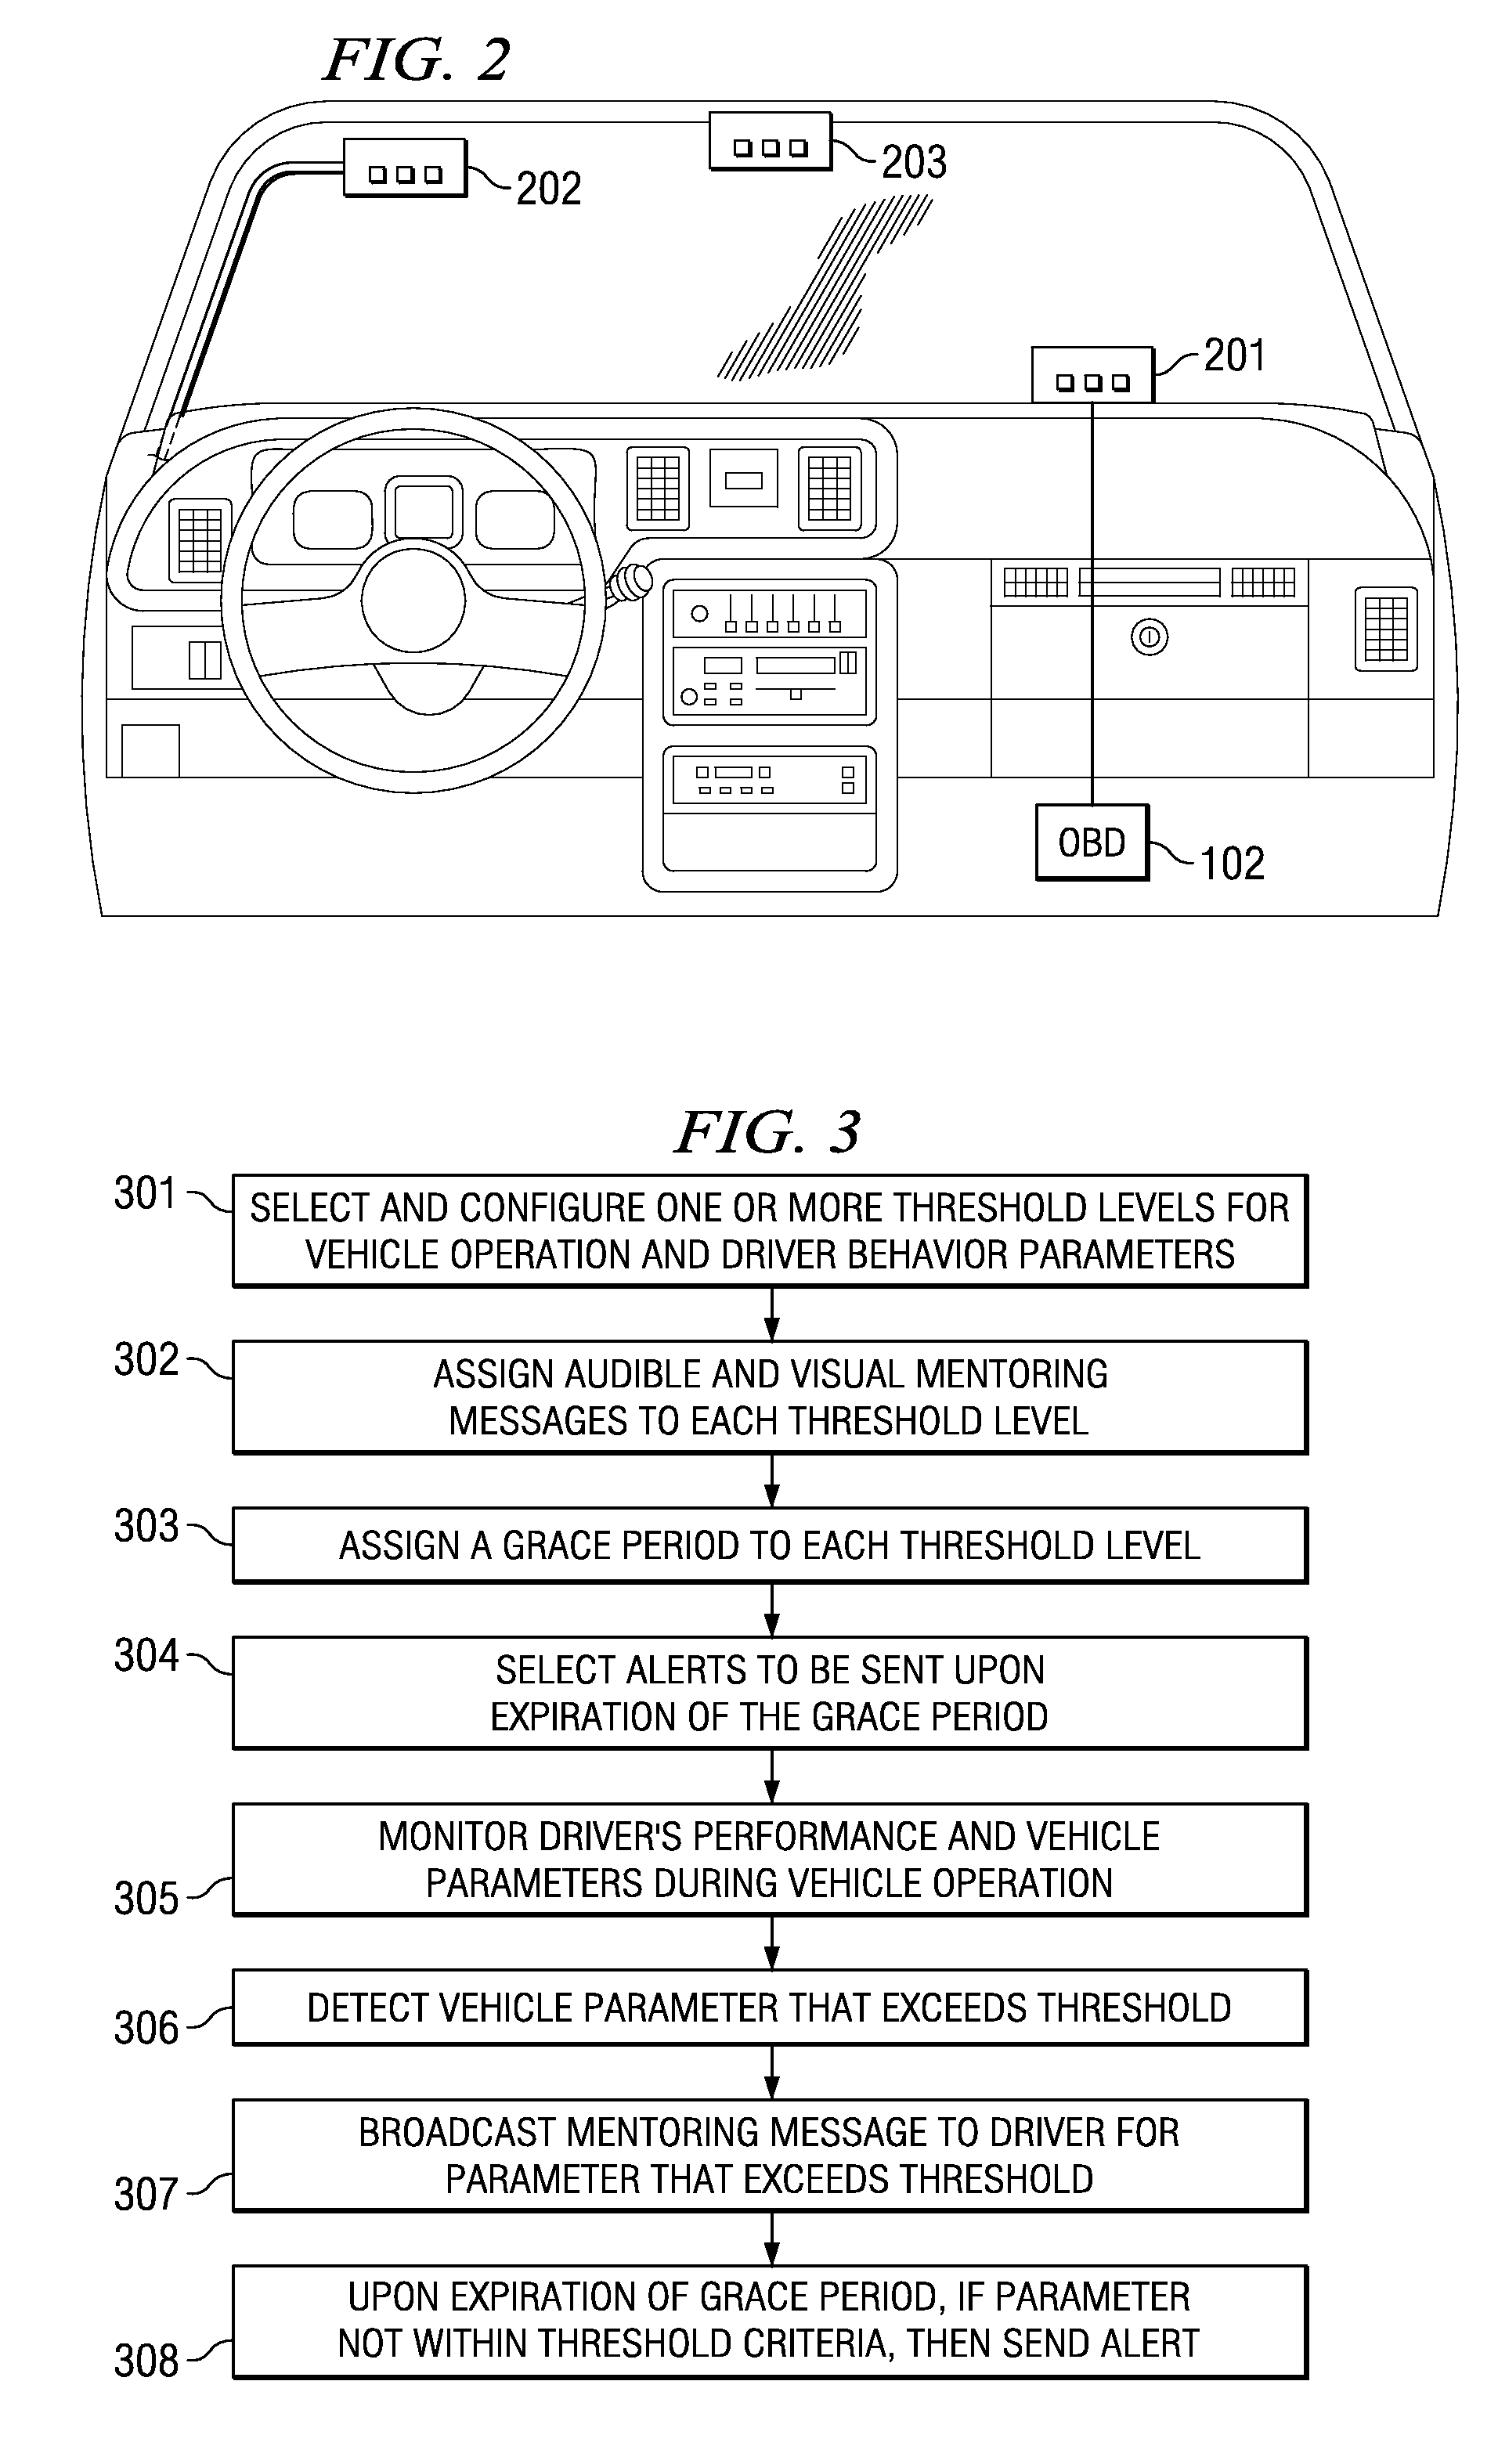 System and Method for Monitoring and Improving Driver Behavior